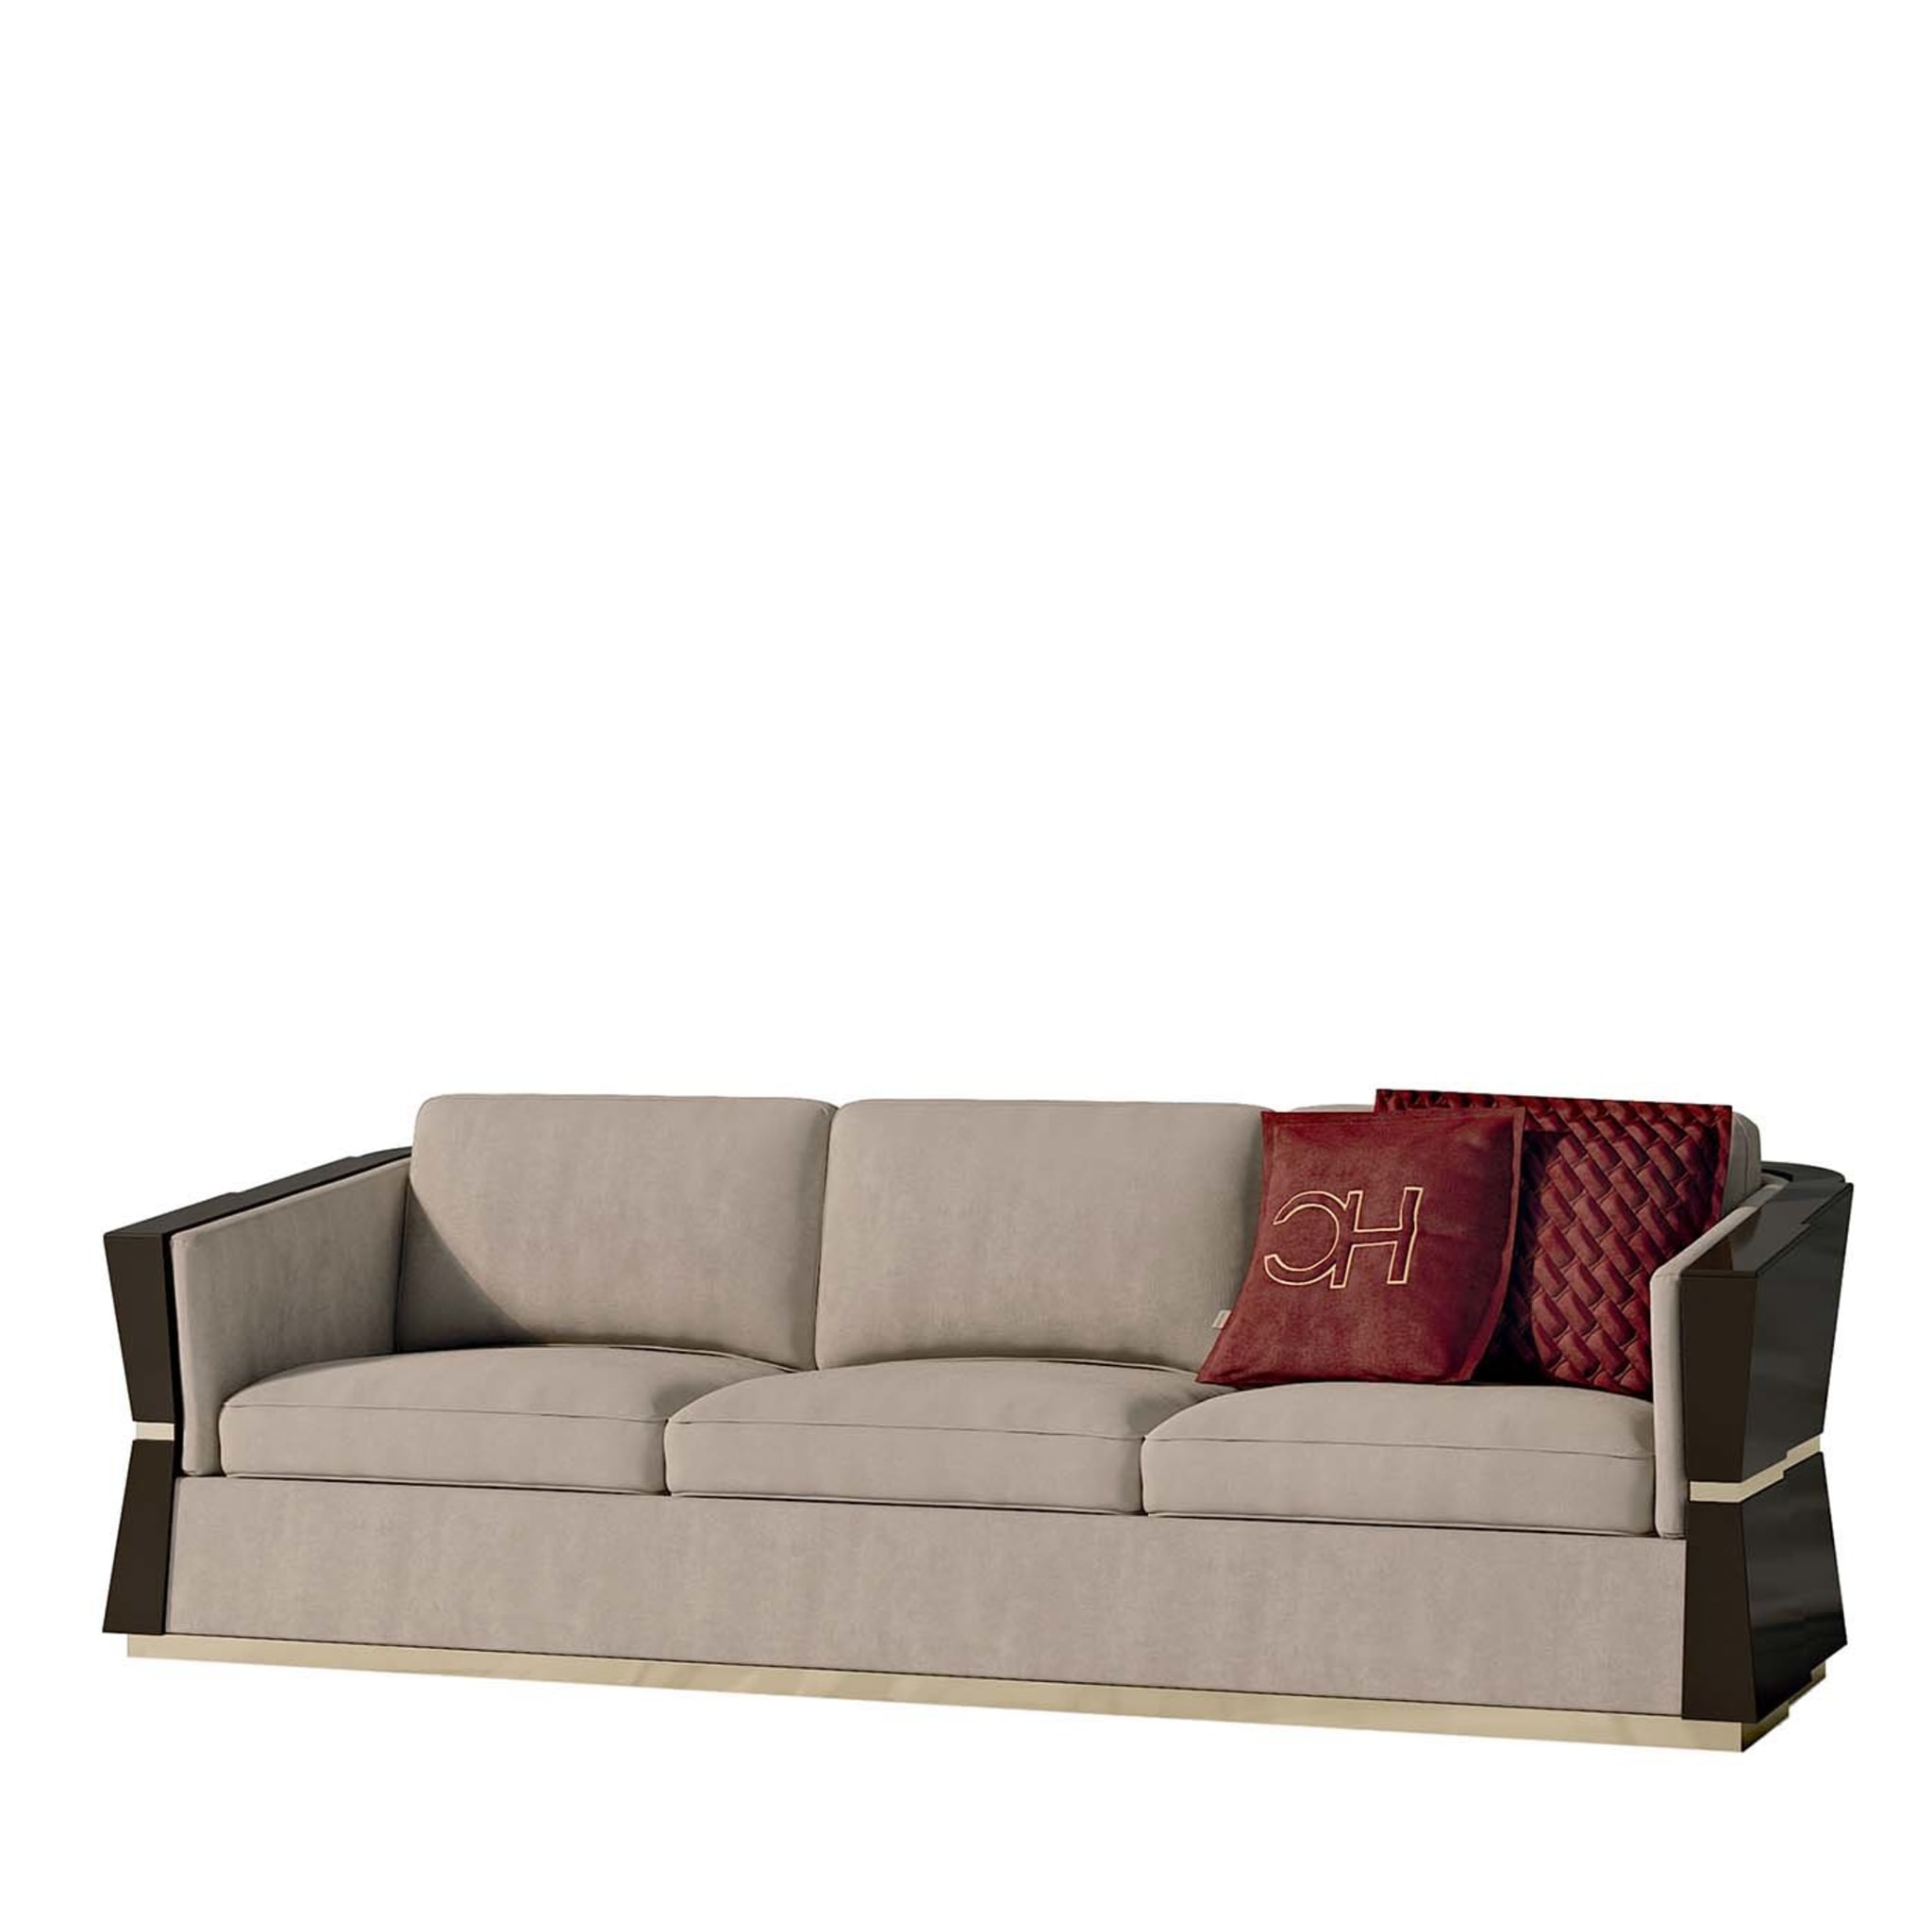 Temptation 3-Seater Wooden Sofa - Main view